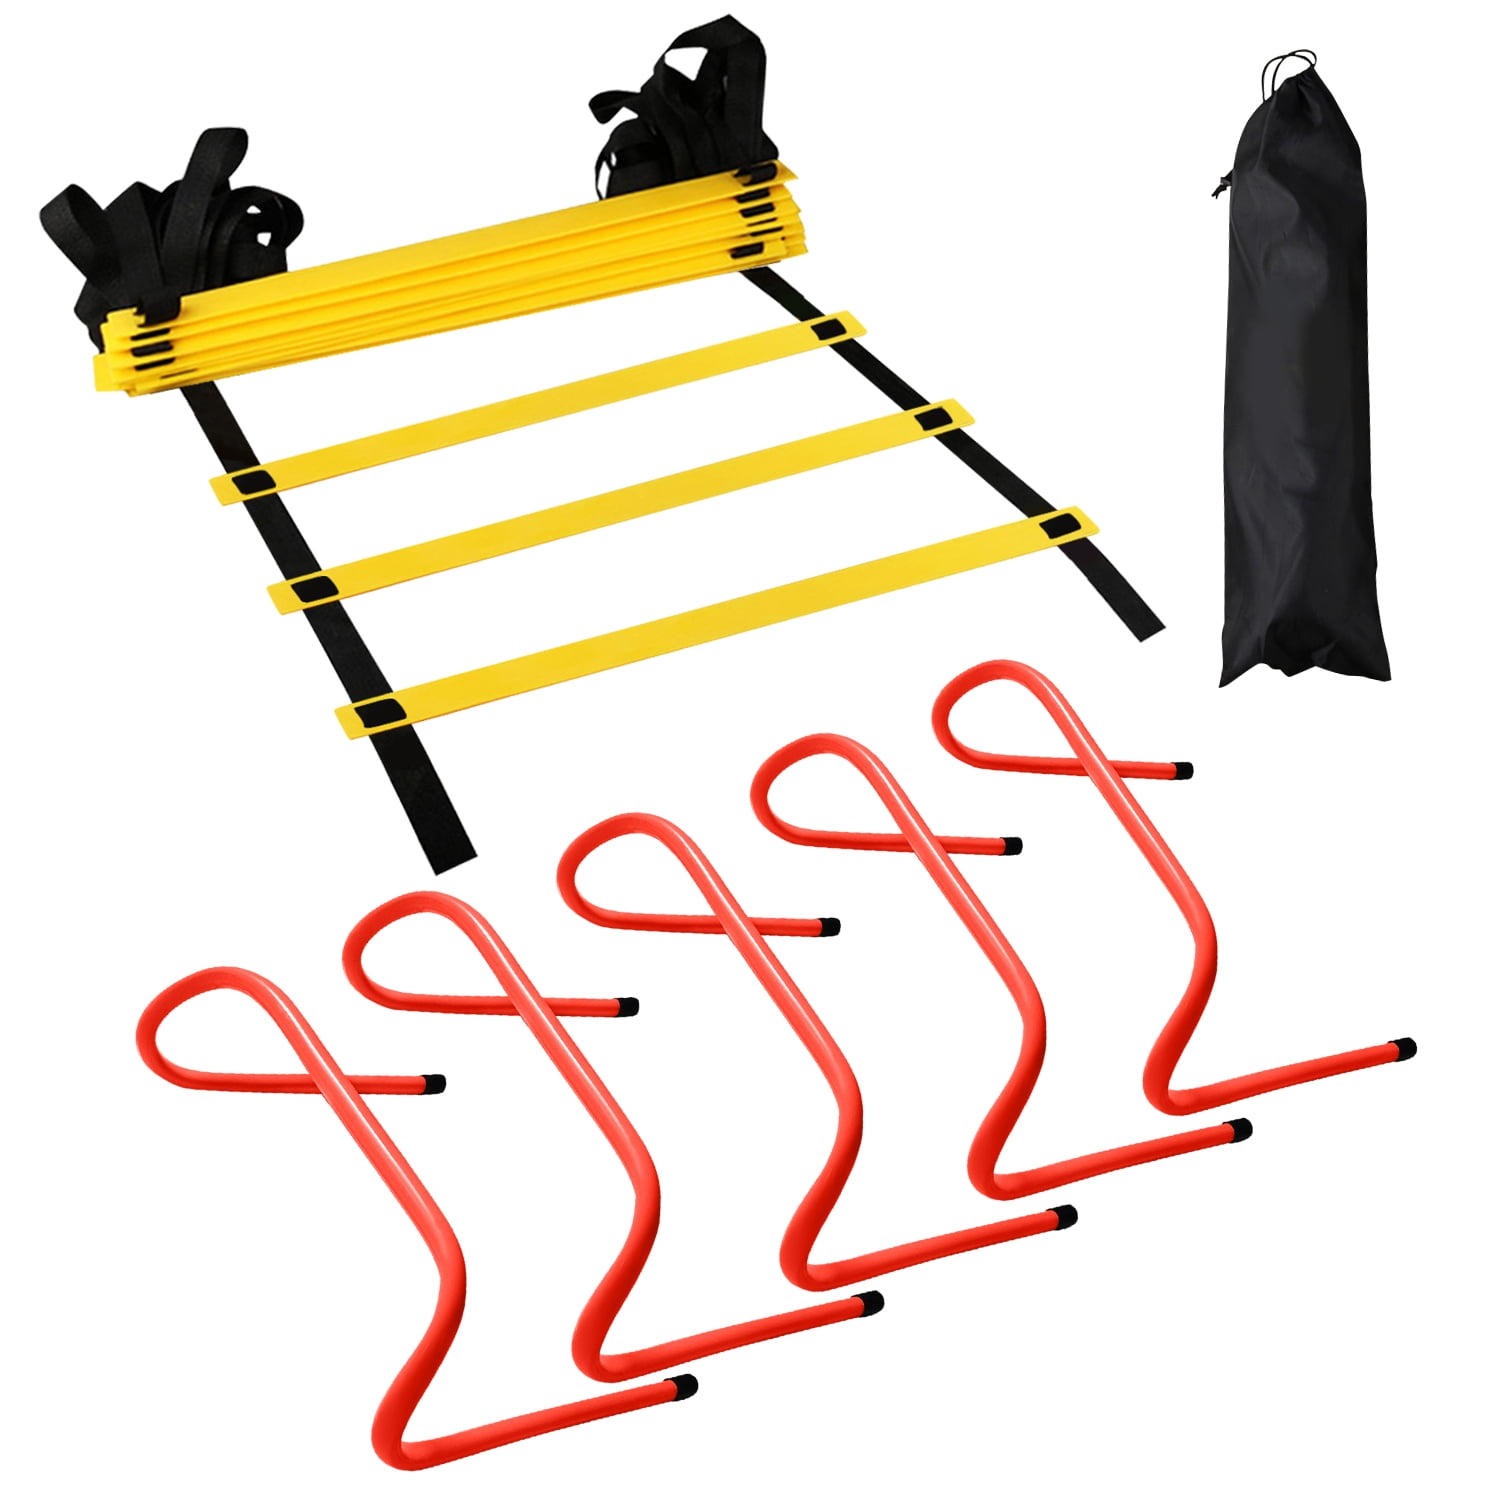 Heights 6”-15” Inch Foldable for Jumping Set of 6 PE Classes,Soccer,Track & Field & More XMSound Adjustable Hurdle Set for Agility Speed Training Obstacle Courses Racing 